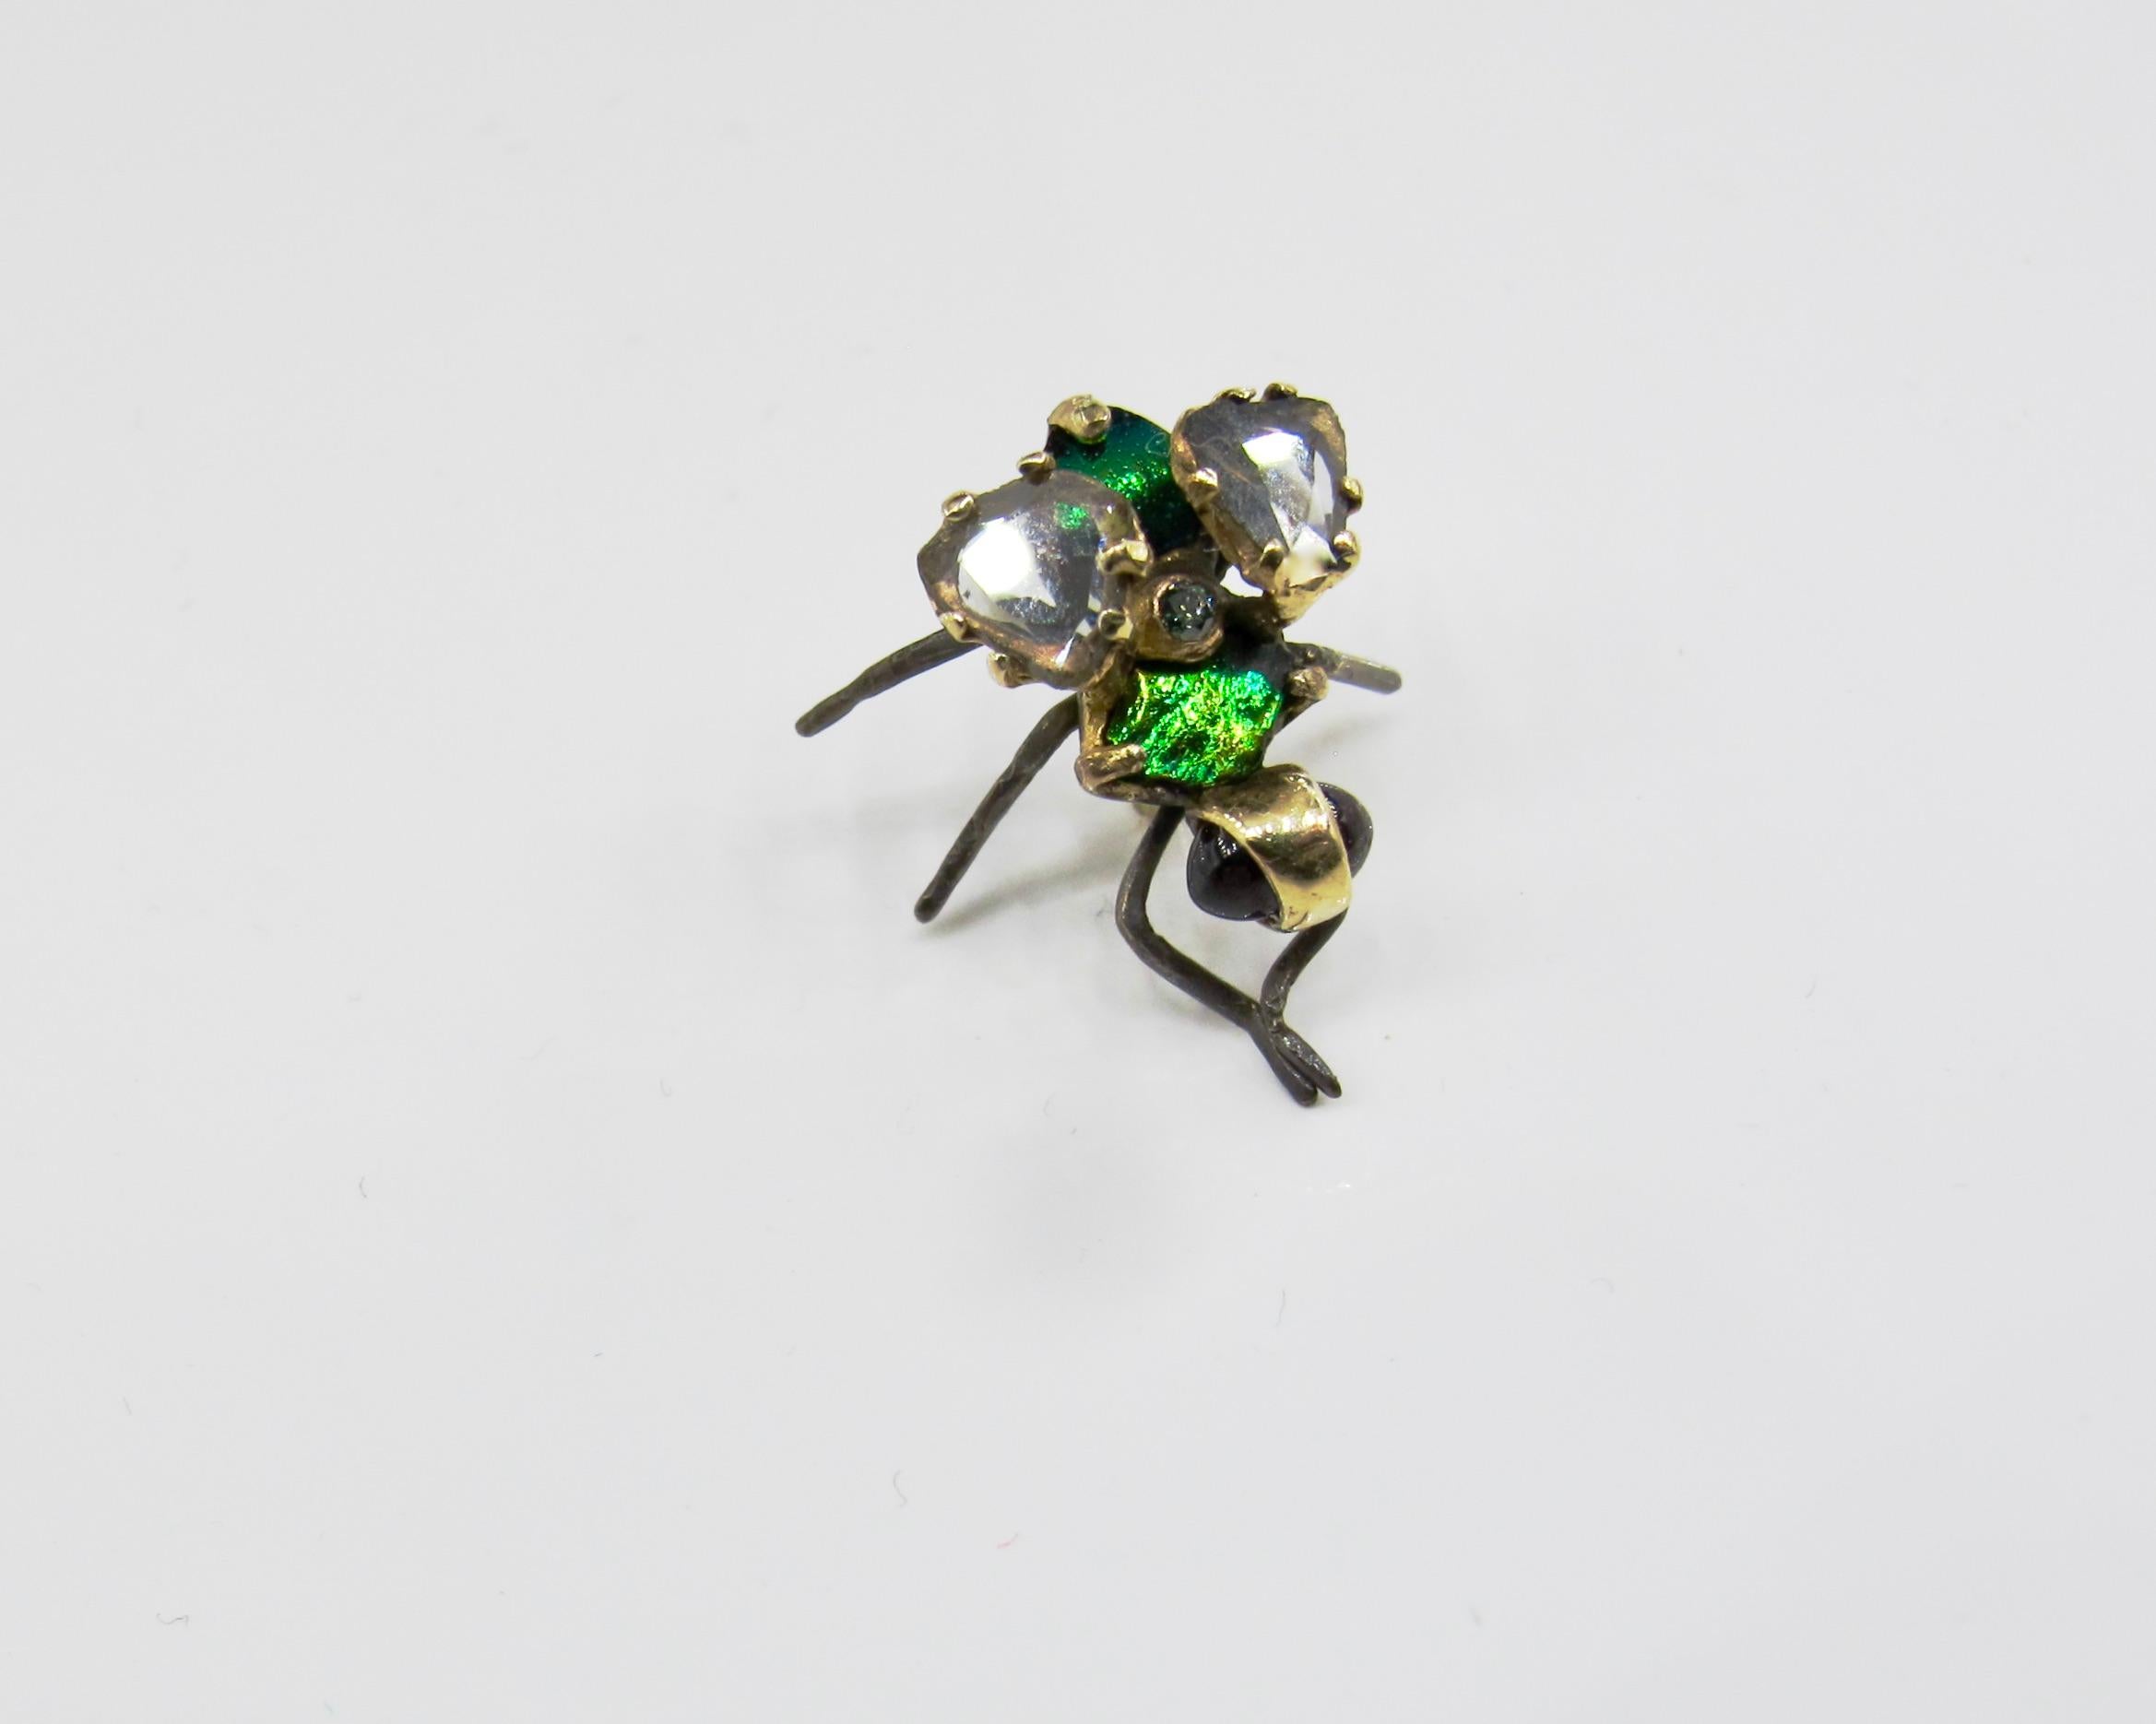 RIMA JEWELS hyperrealistic fly stud earring features an 18k gold body with oxidized silver legs. The common house fly's wings are comprised of diamond slices and the upper body is made of elytra beetle wing doublets. Glowing garnet cabochons are set